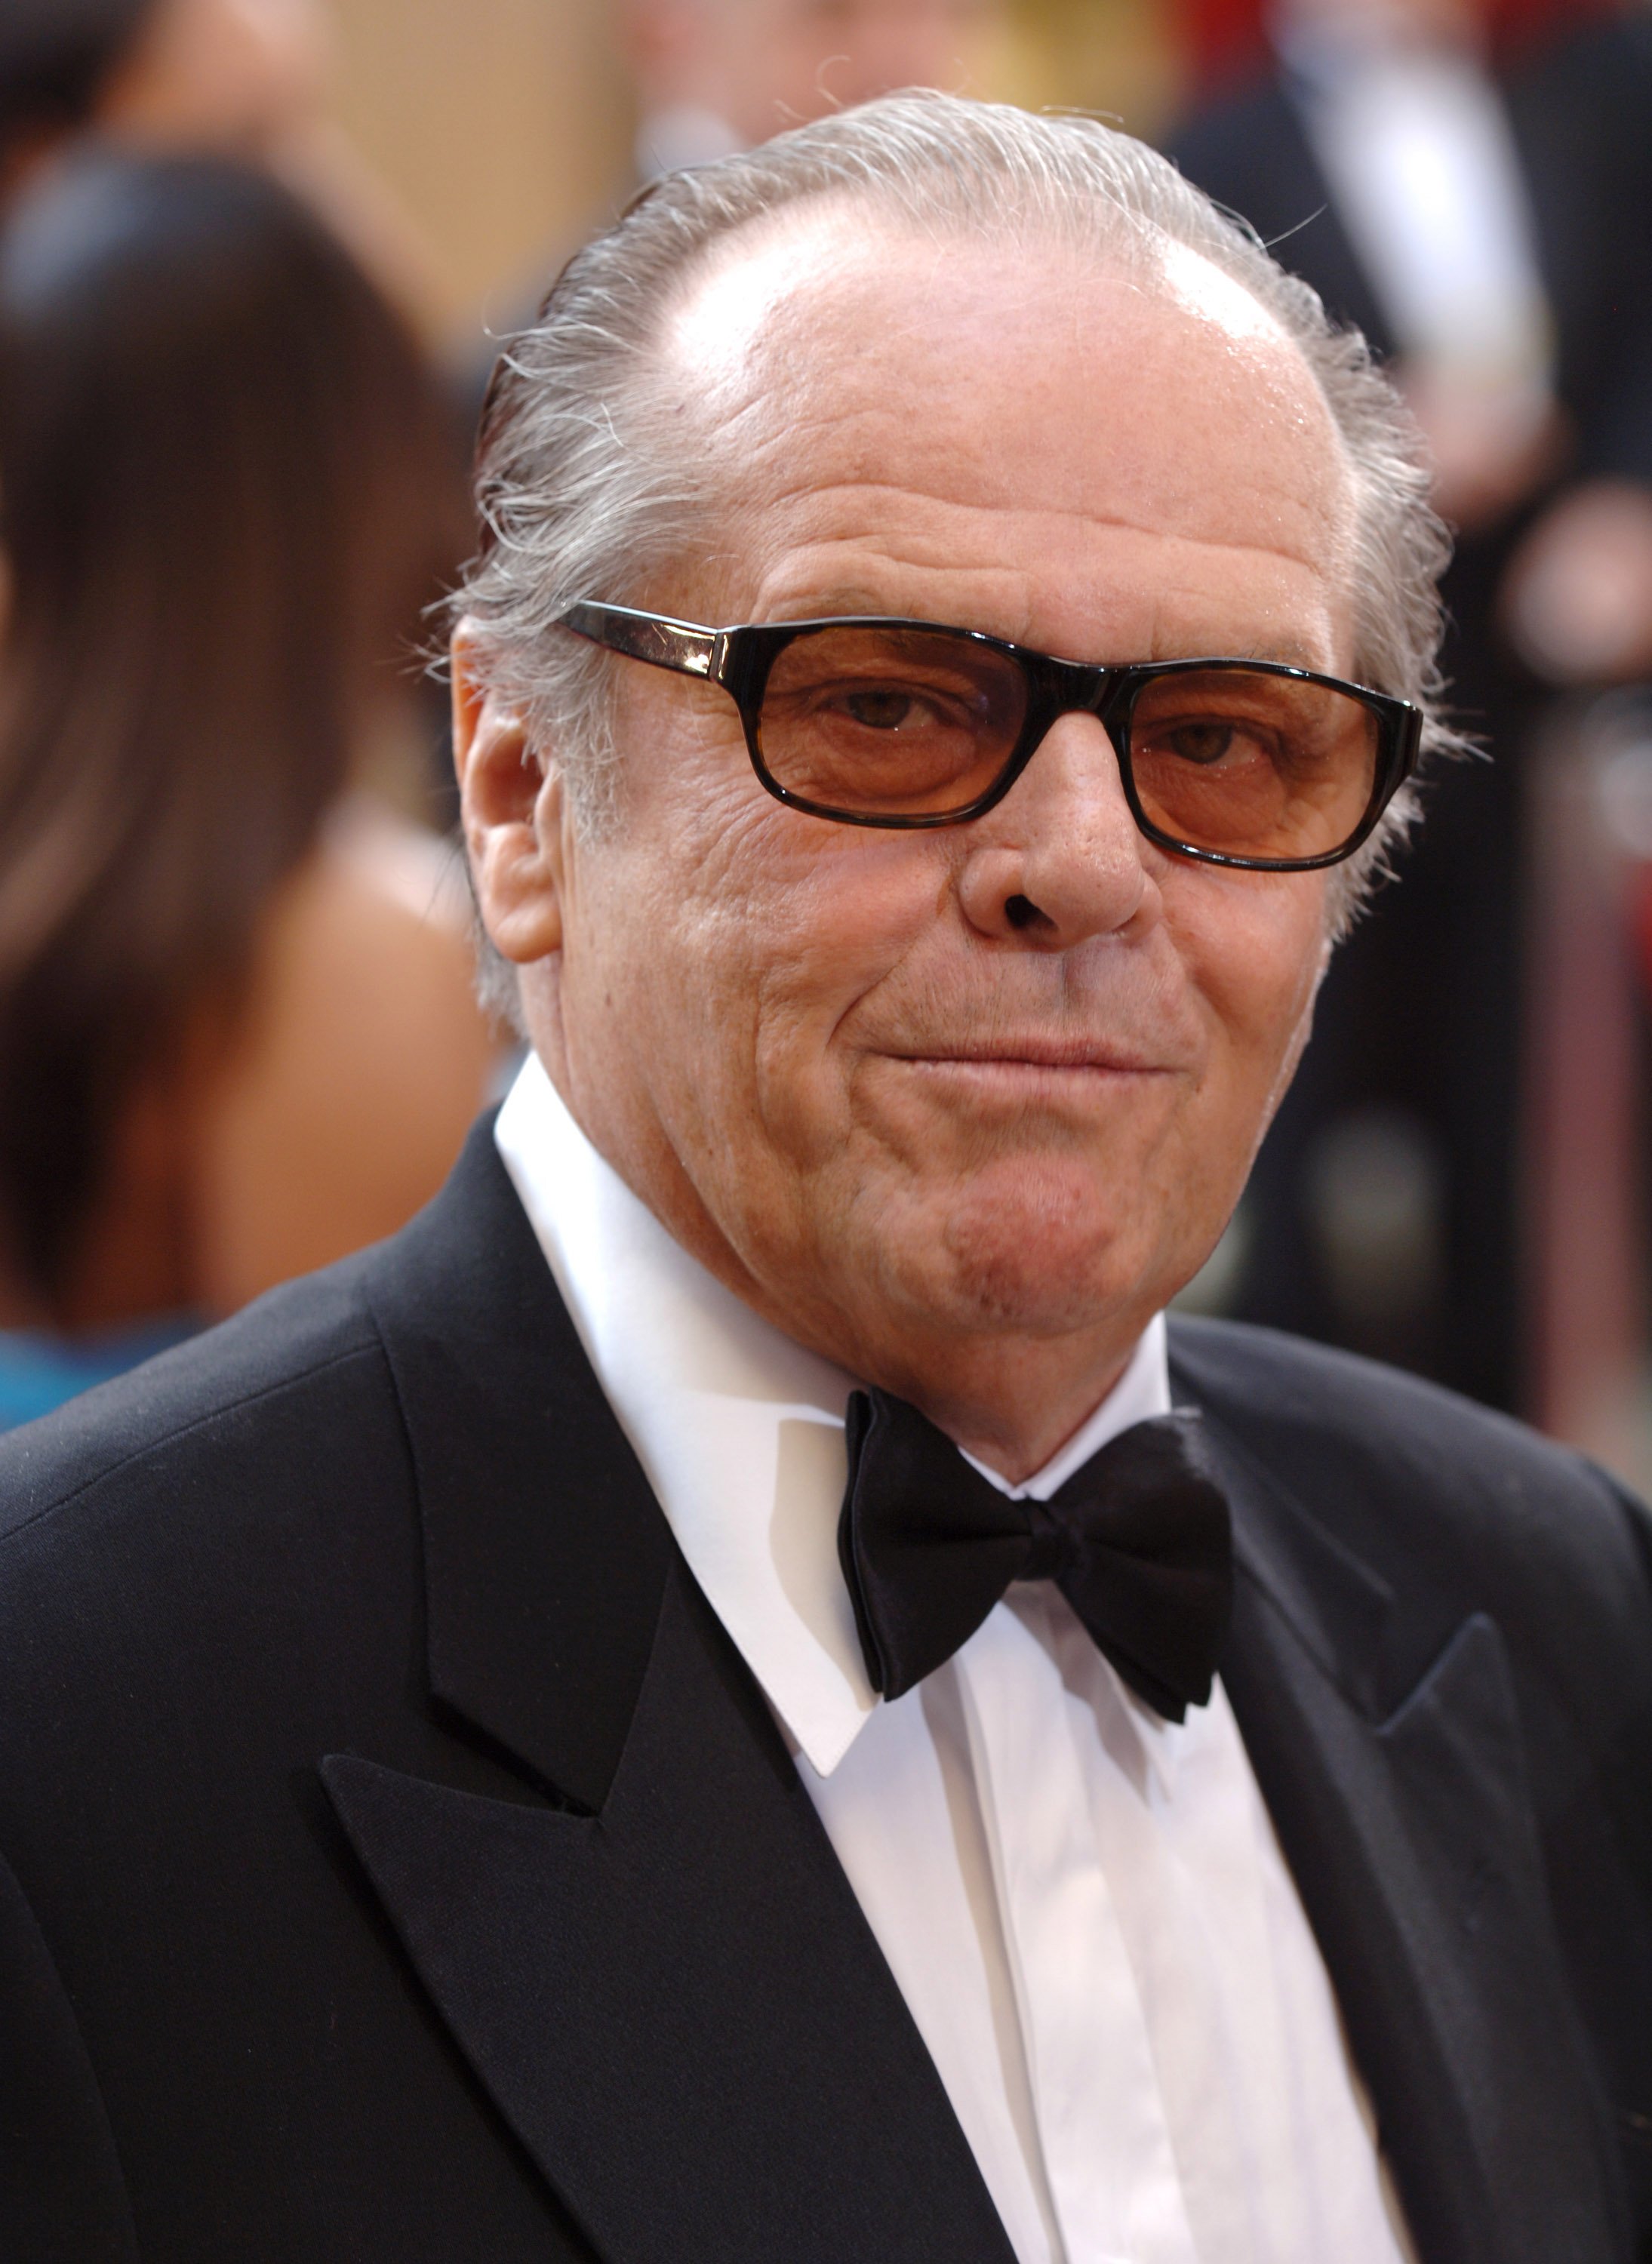 Jack Nicholson during The 78th Annual Academy Awards - Red Carpet at Kodak Theatre in Hollywood, California, United States | Source: Getty Images 